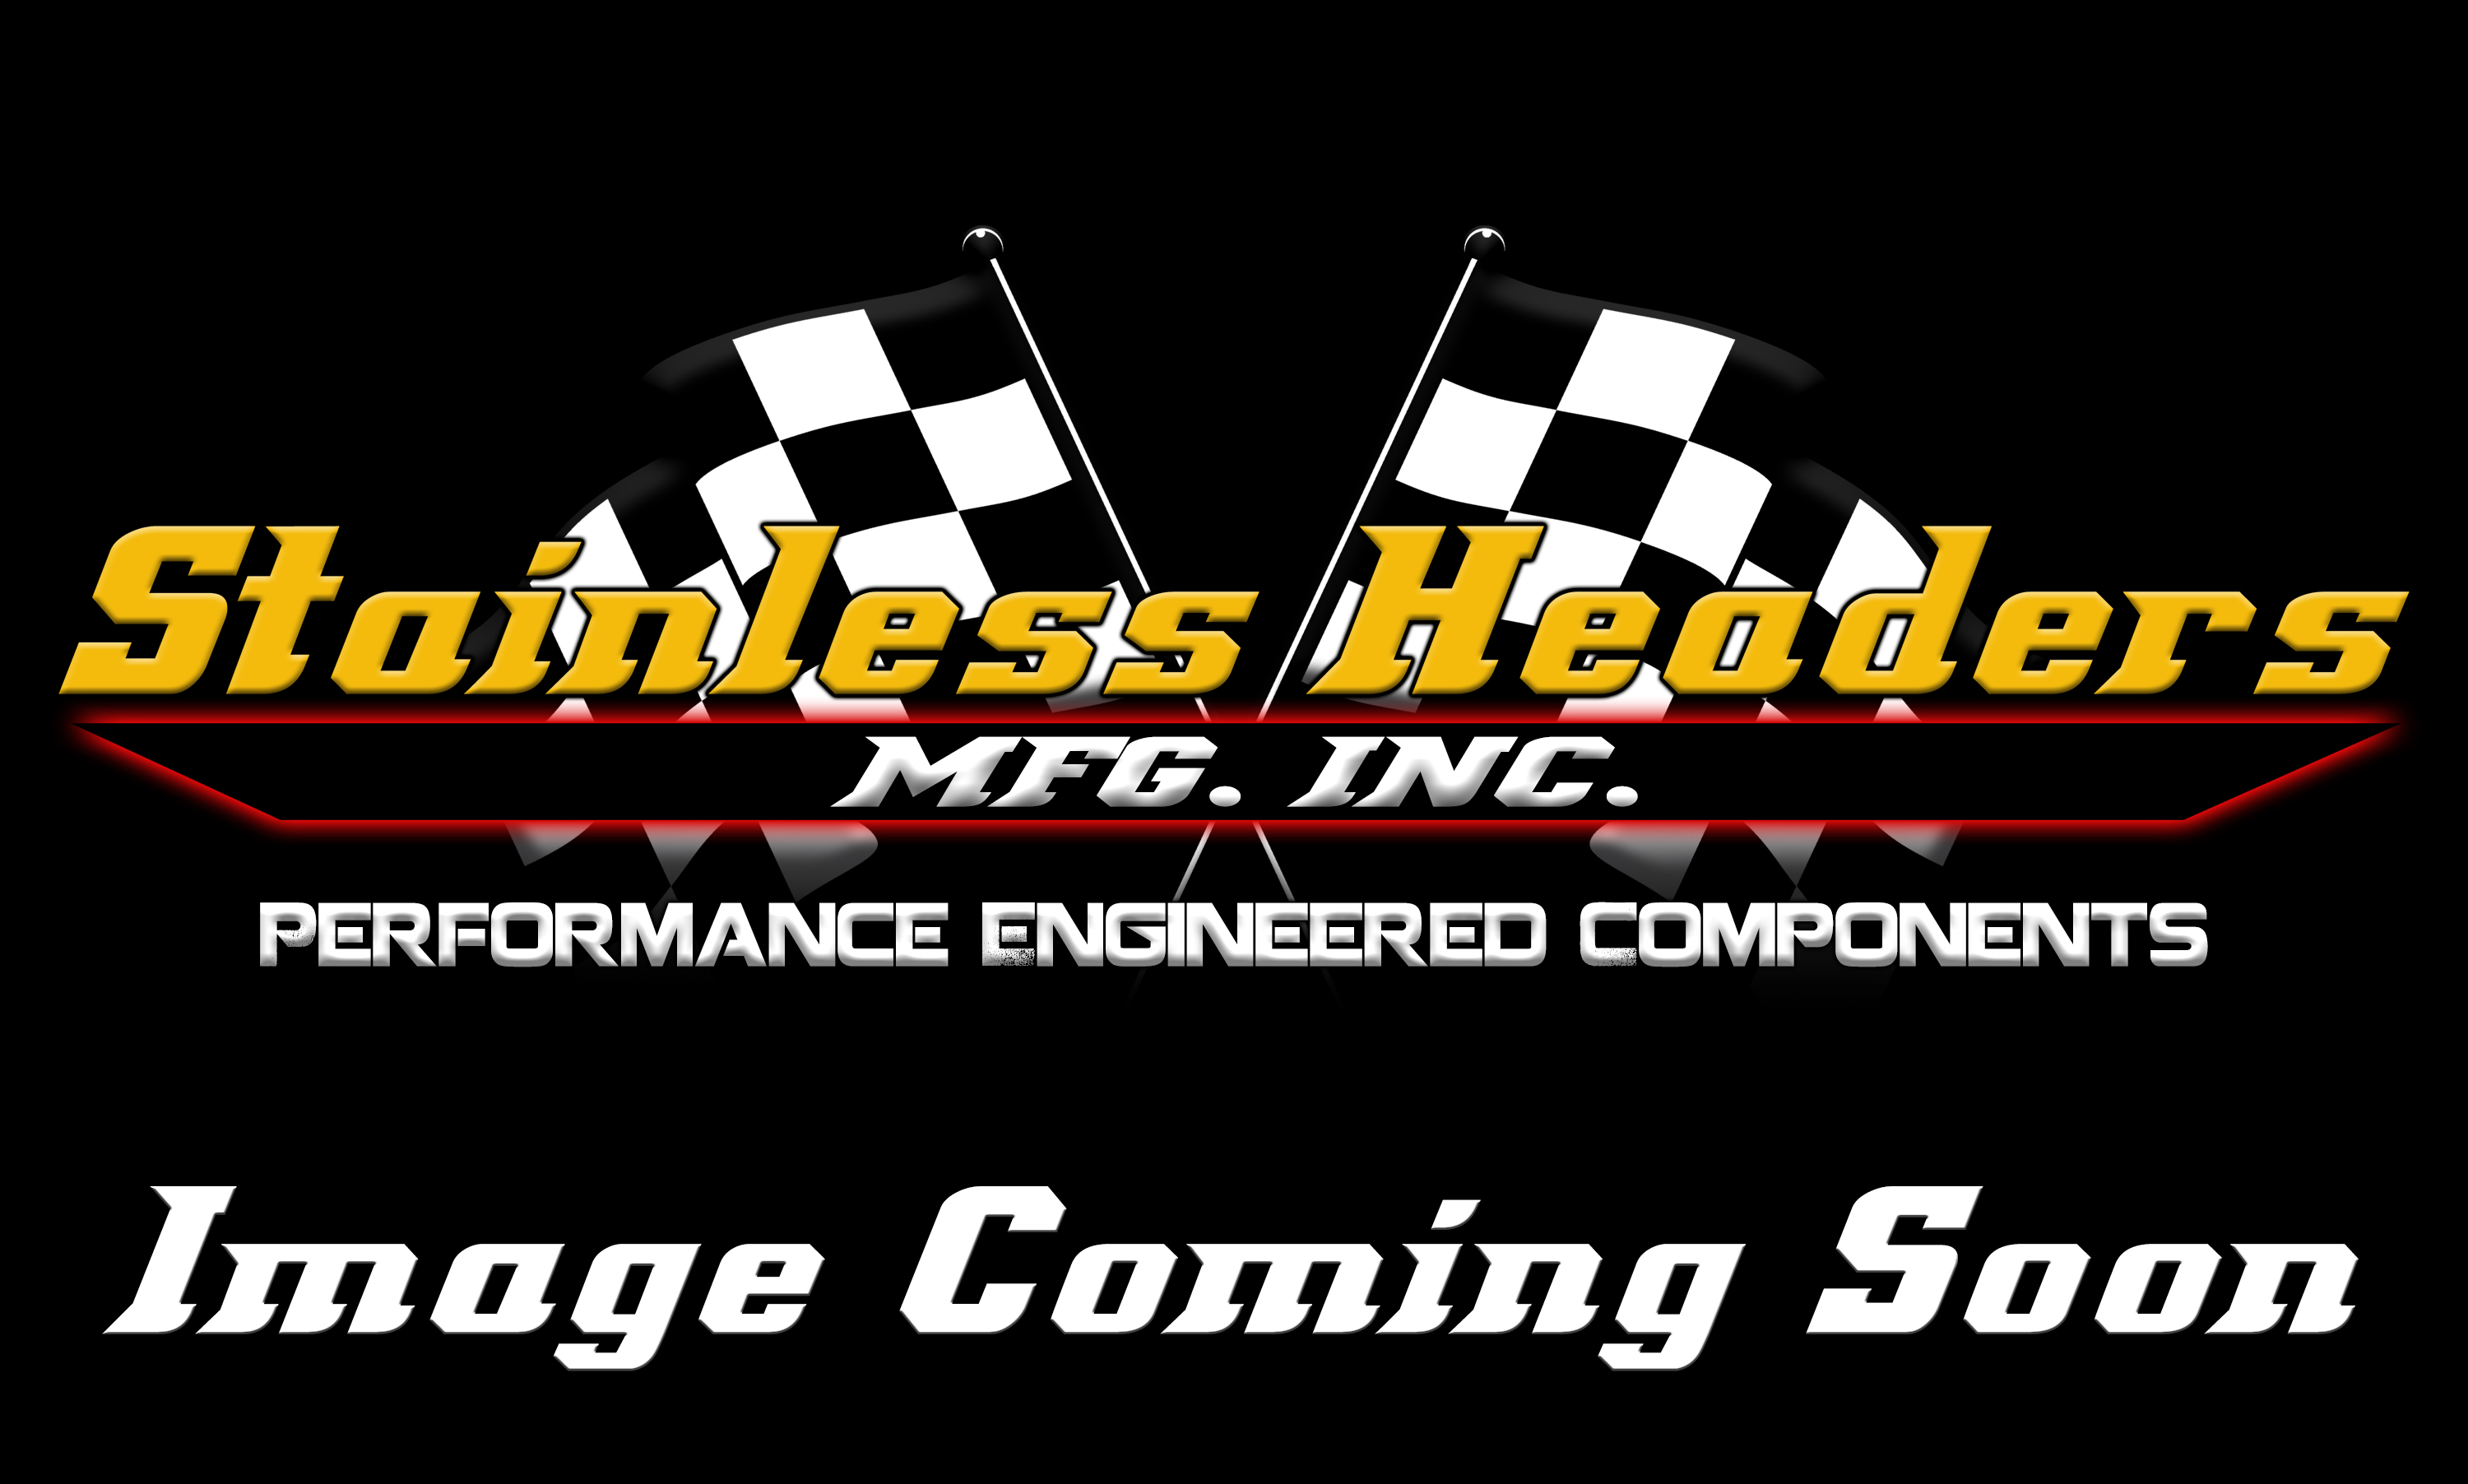 Custom Header Components - Merge Collectors - Stainless Headers - 1 5/8" Primary 8 into 1 Performance Merge Collector-16ga 304ss